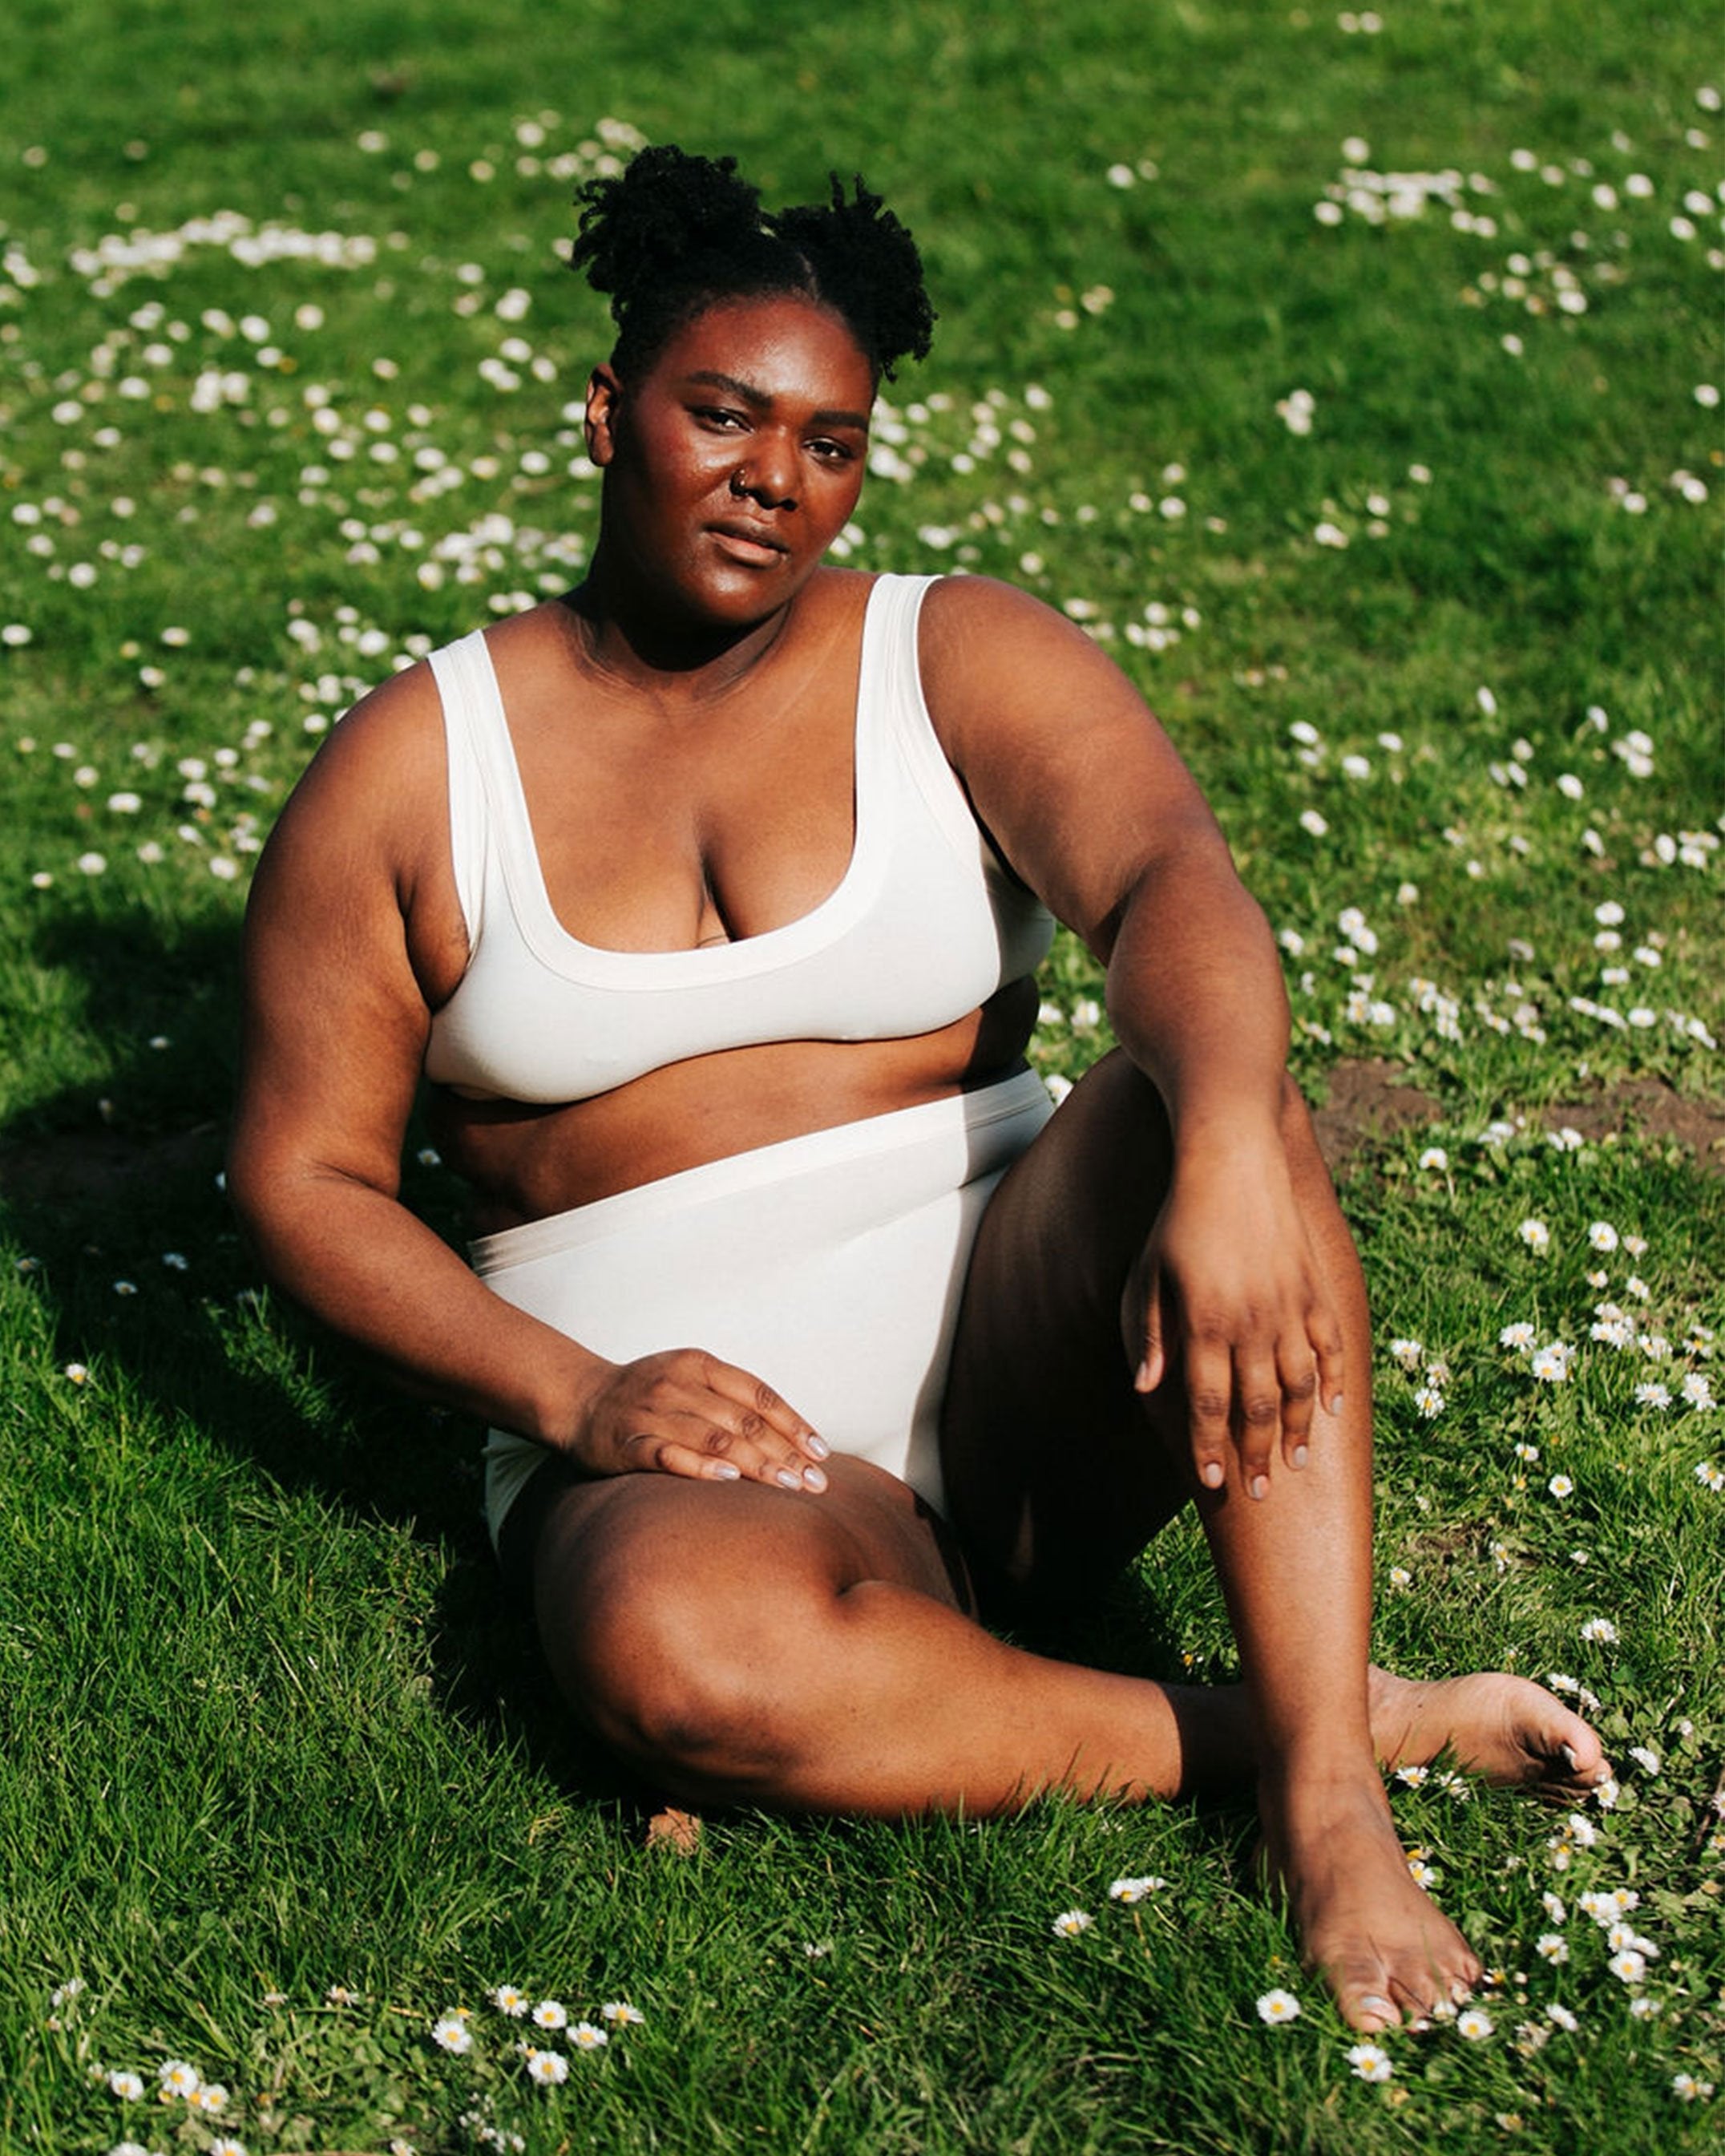 Plus-sized model sitting in the grass wearing Thunderpants organic cotton Bralette and Original style underwear in plain off-white.